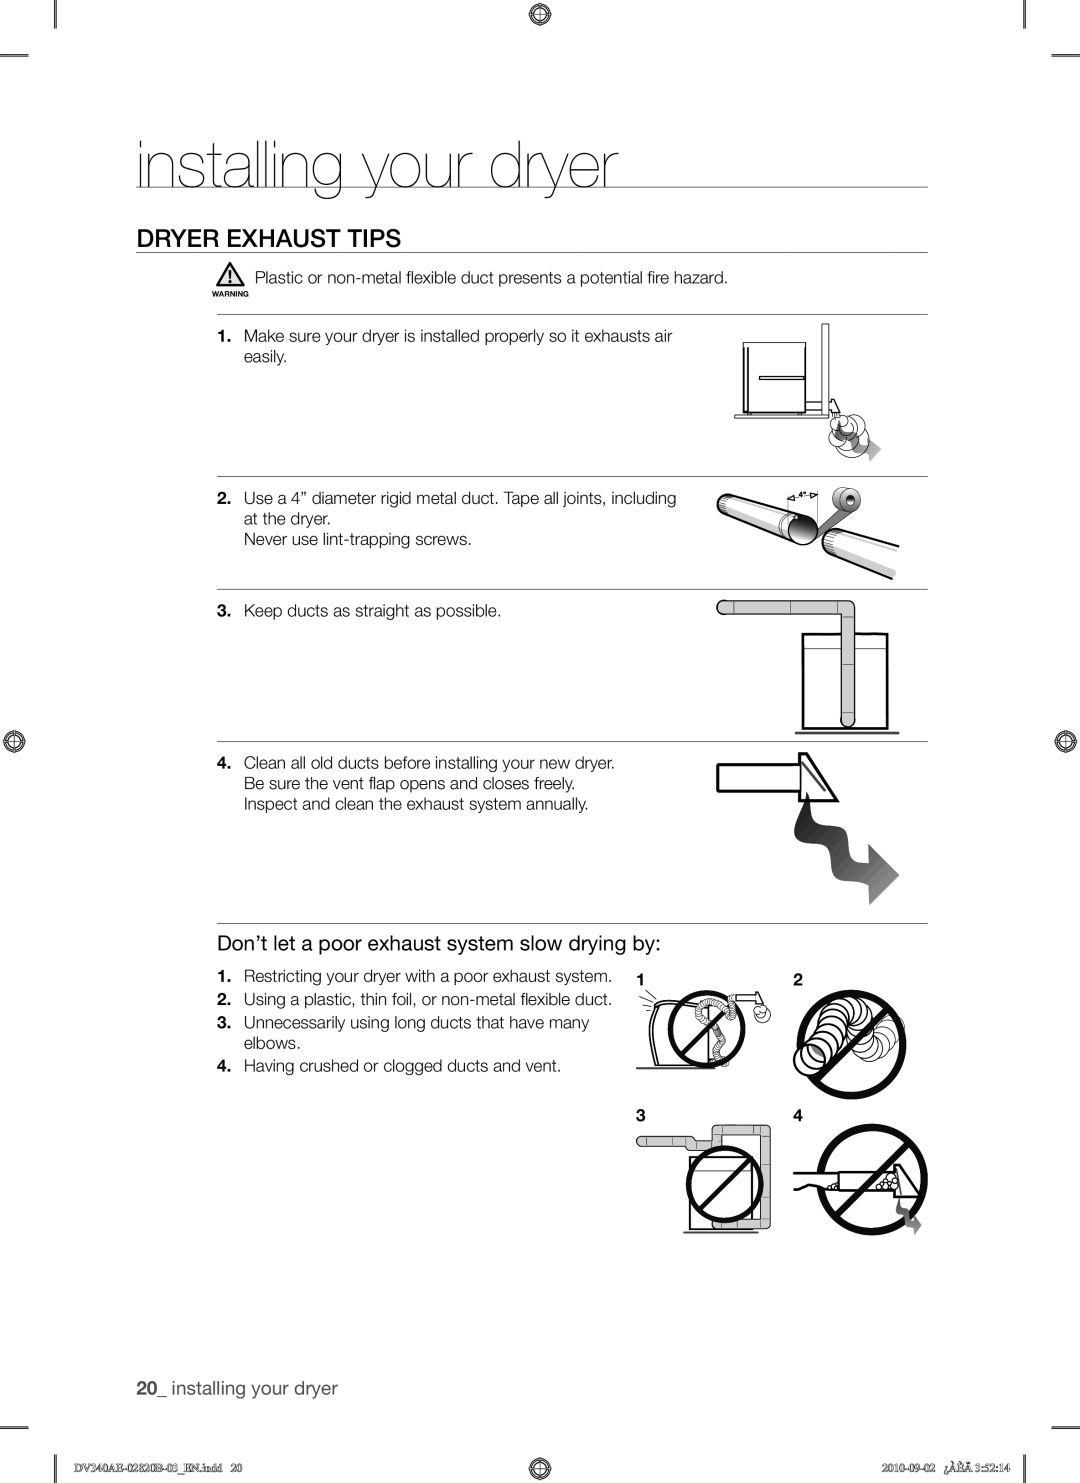 Samsung DV340AEW, DV330AEW user manual Dryer Exhaust Tips, Don’t let a poor exhaust system slow drying by 